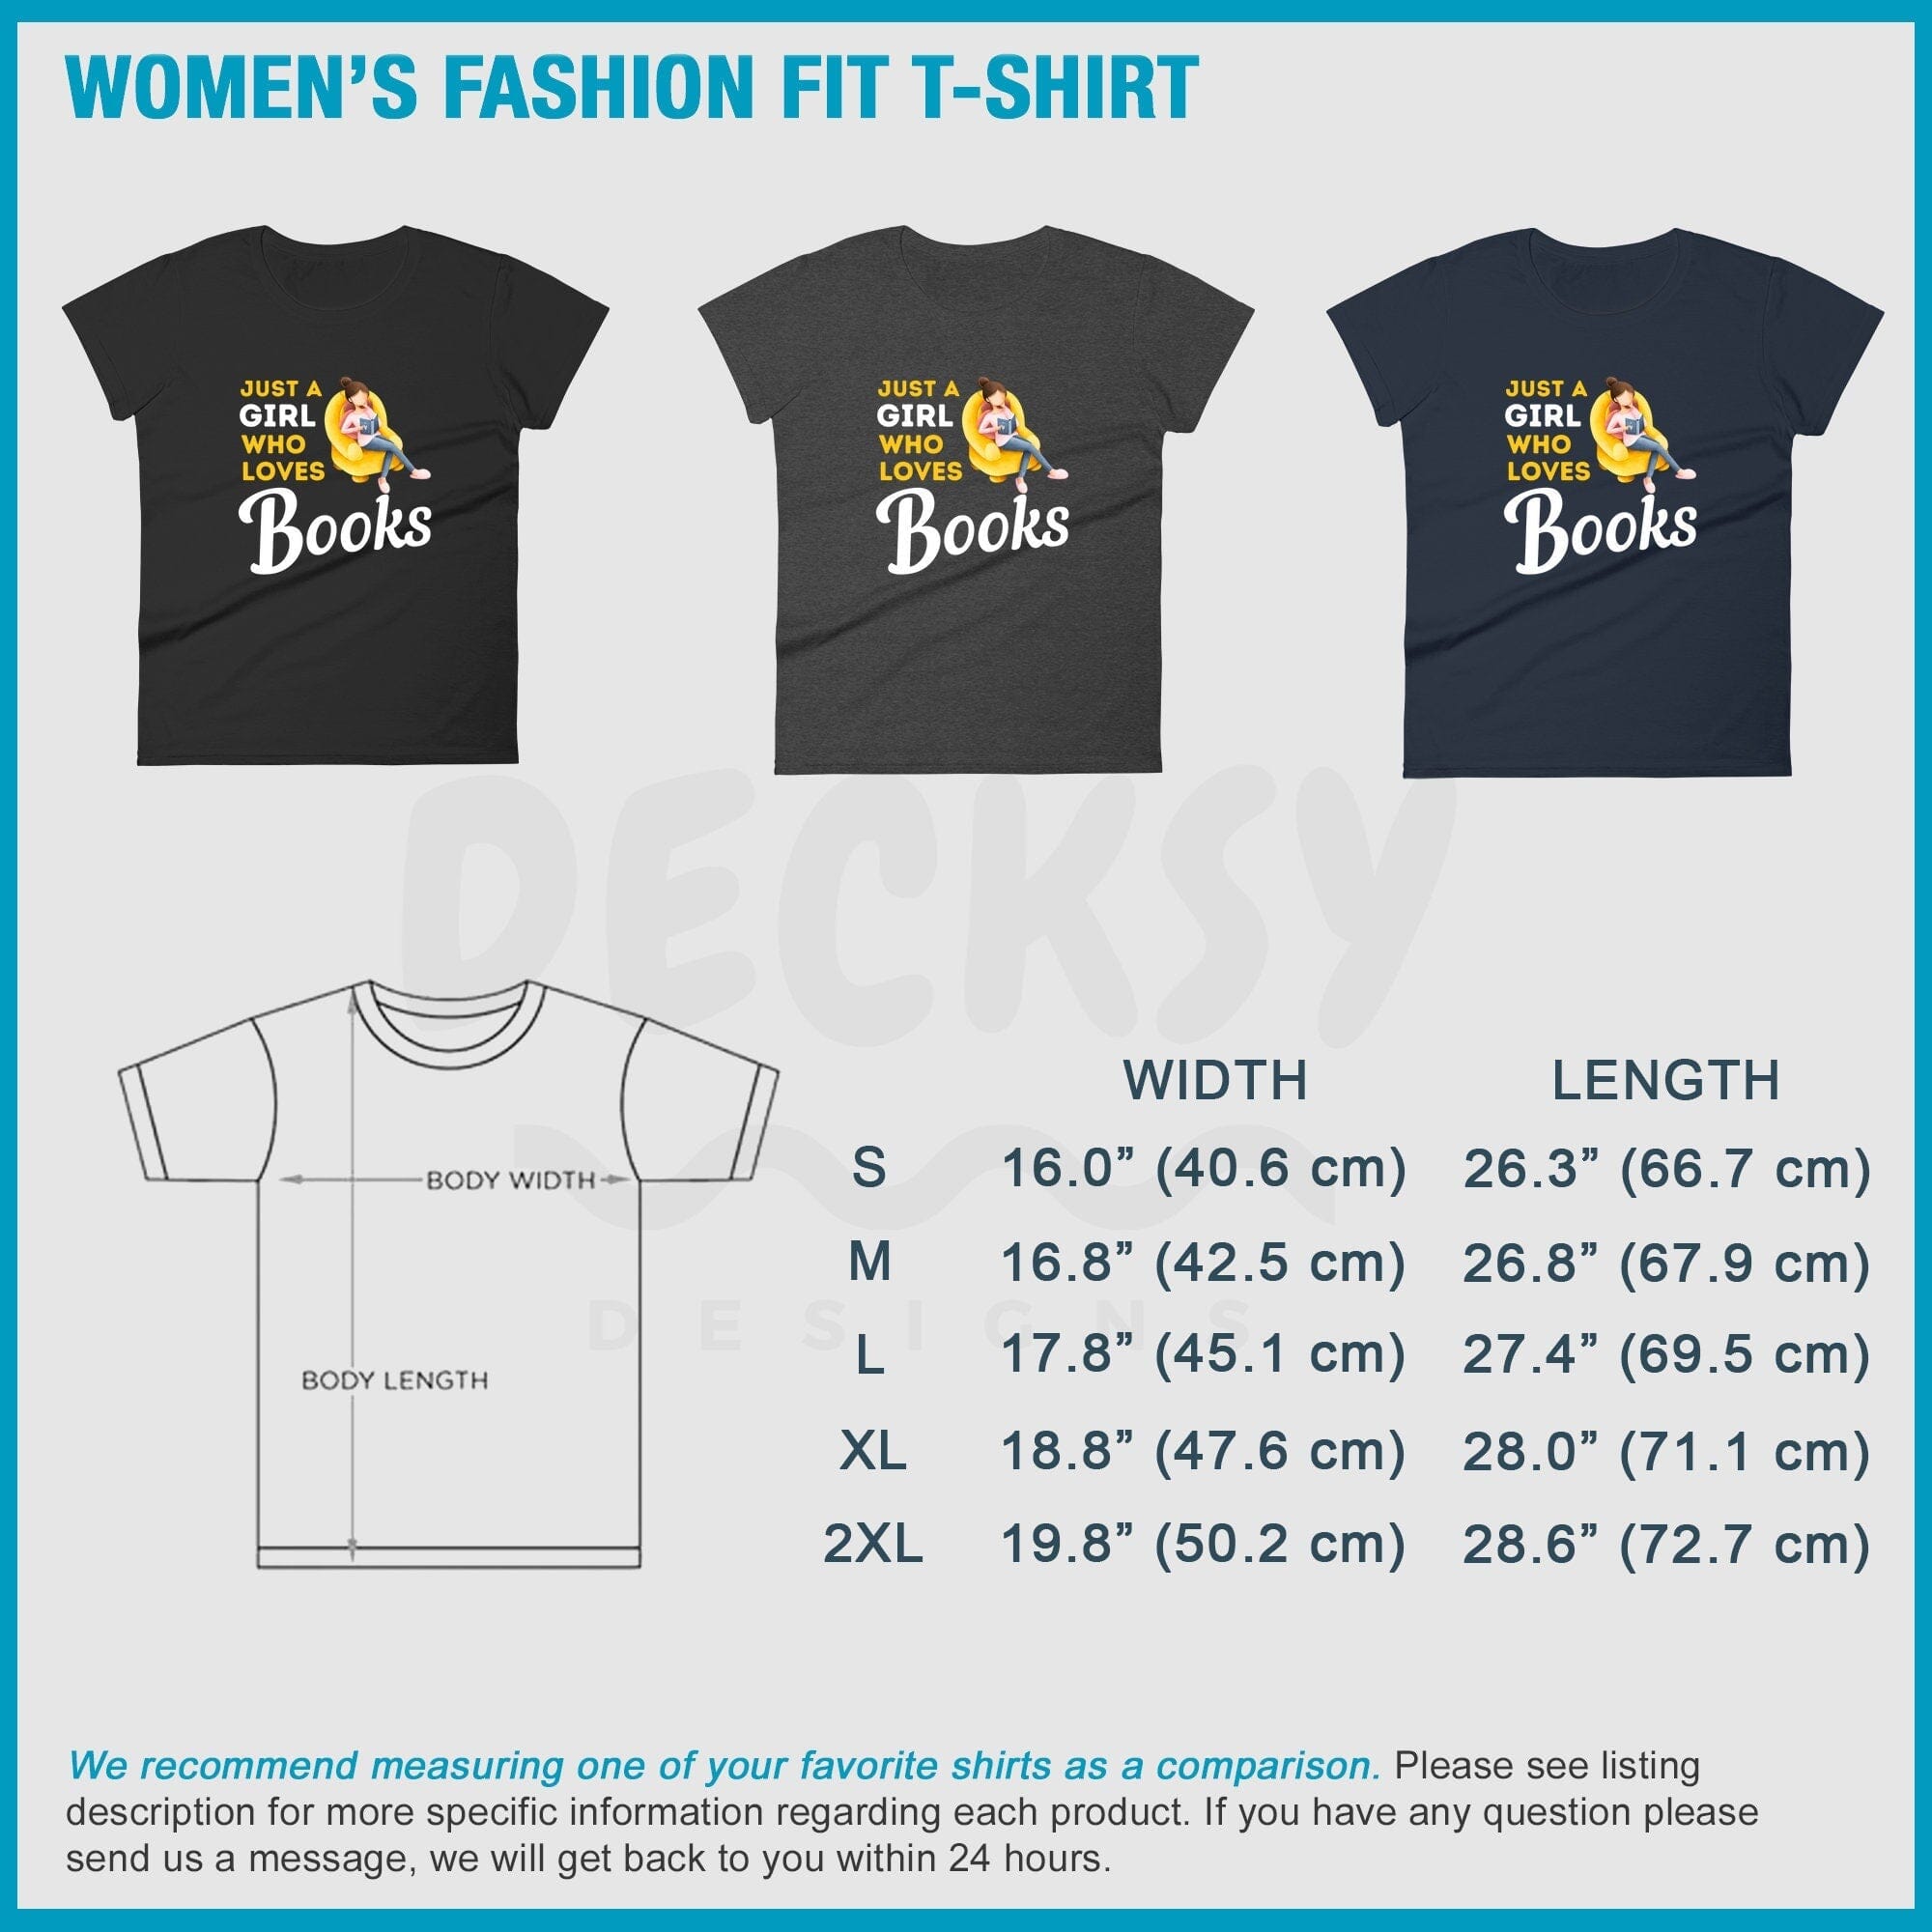 Book Shirt for Women, Gift For Book Lover-Clothing:Gender-Neutral Adult Clothing:Tops & Tees:T-shirts:Graphic Tees-DecksyDesigns